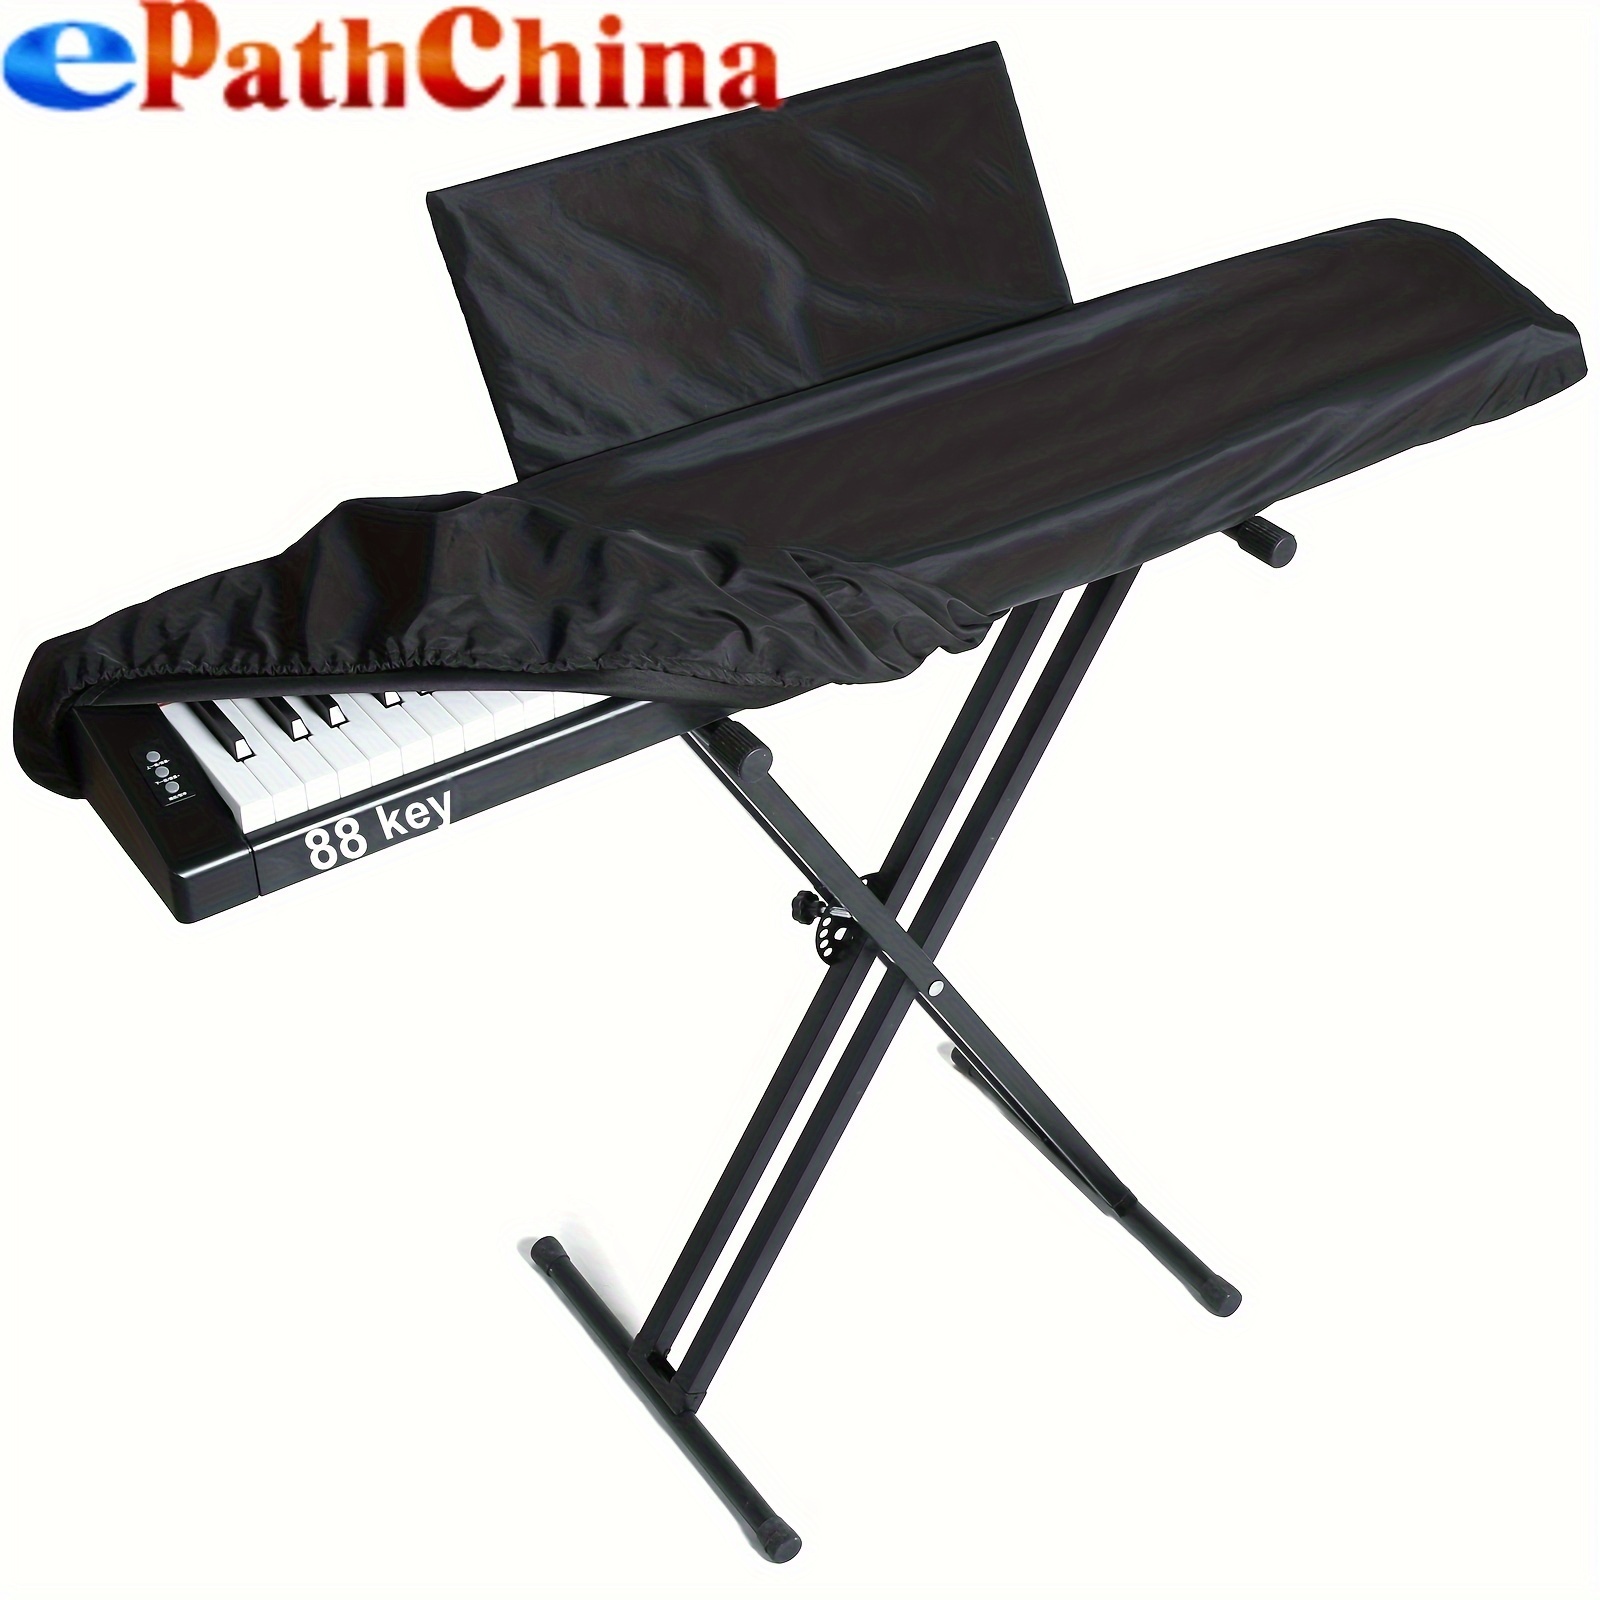 

Washable Piano Keyboard Dust Cover For 88 Keys Digital Electric Piano With Music Sheet Stand Additional Cover, Drawcord Full Cover